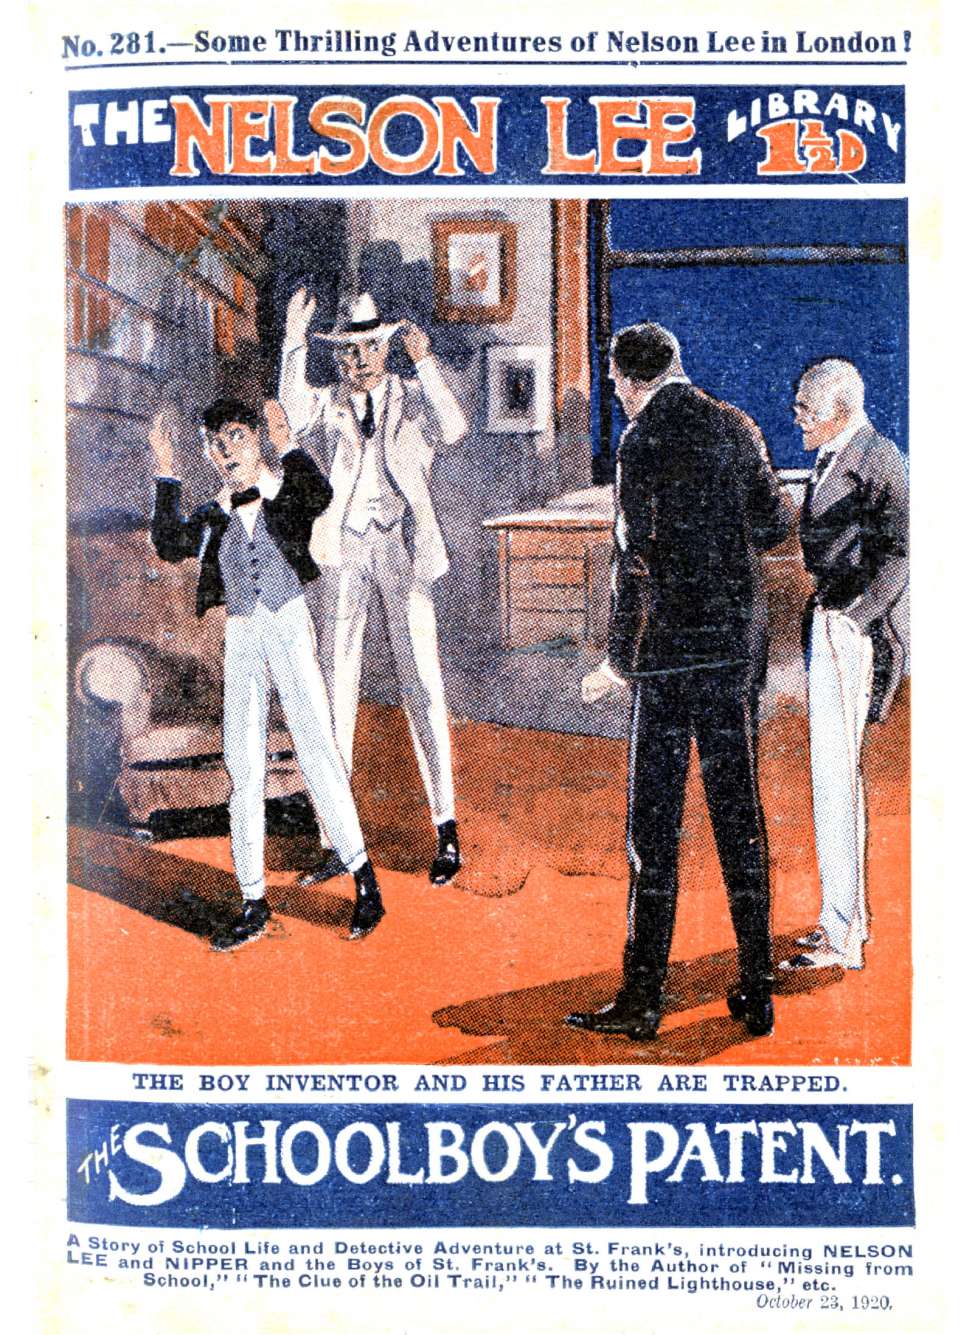 Comic Book Cover For Nelson Lee Library s1 281 - The Schoolboy's Patent